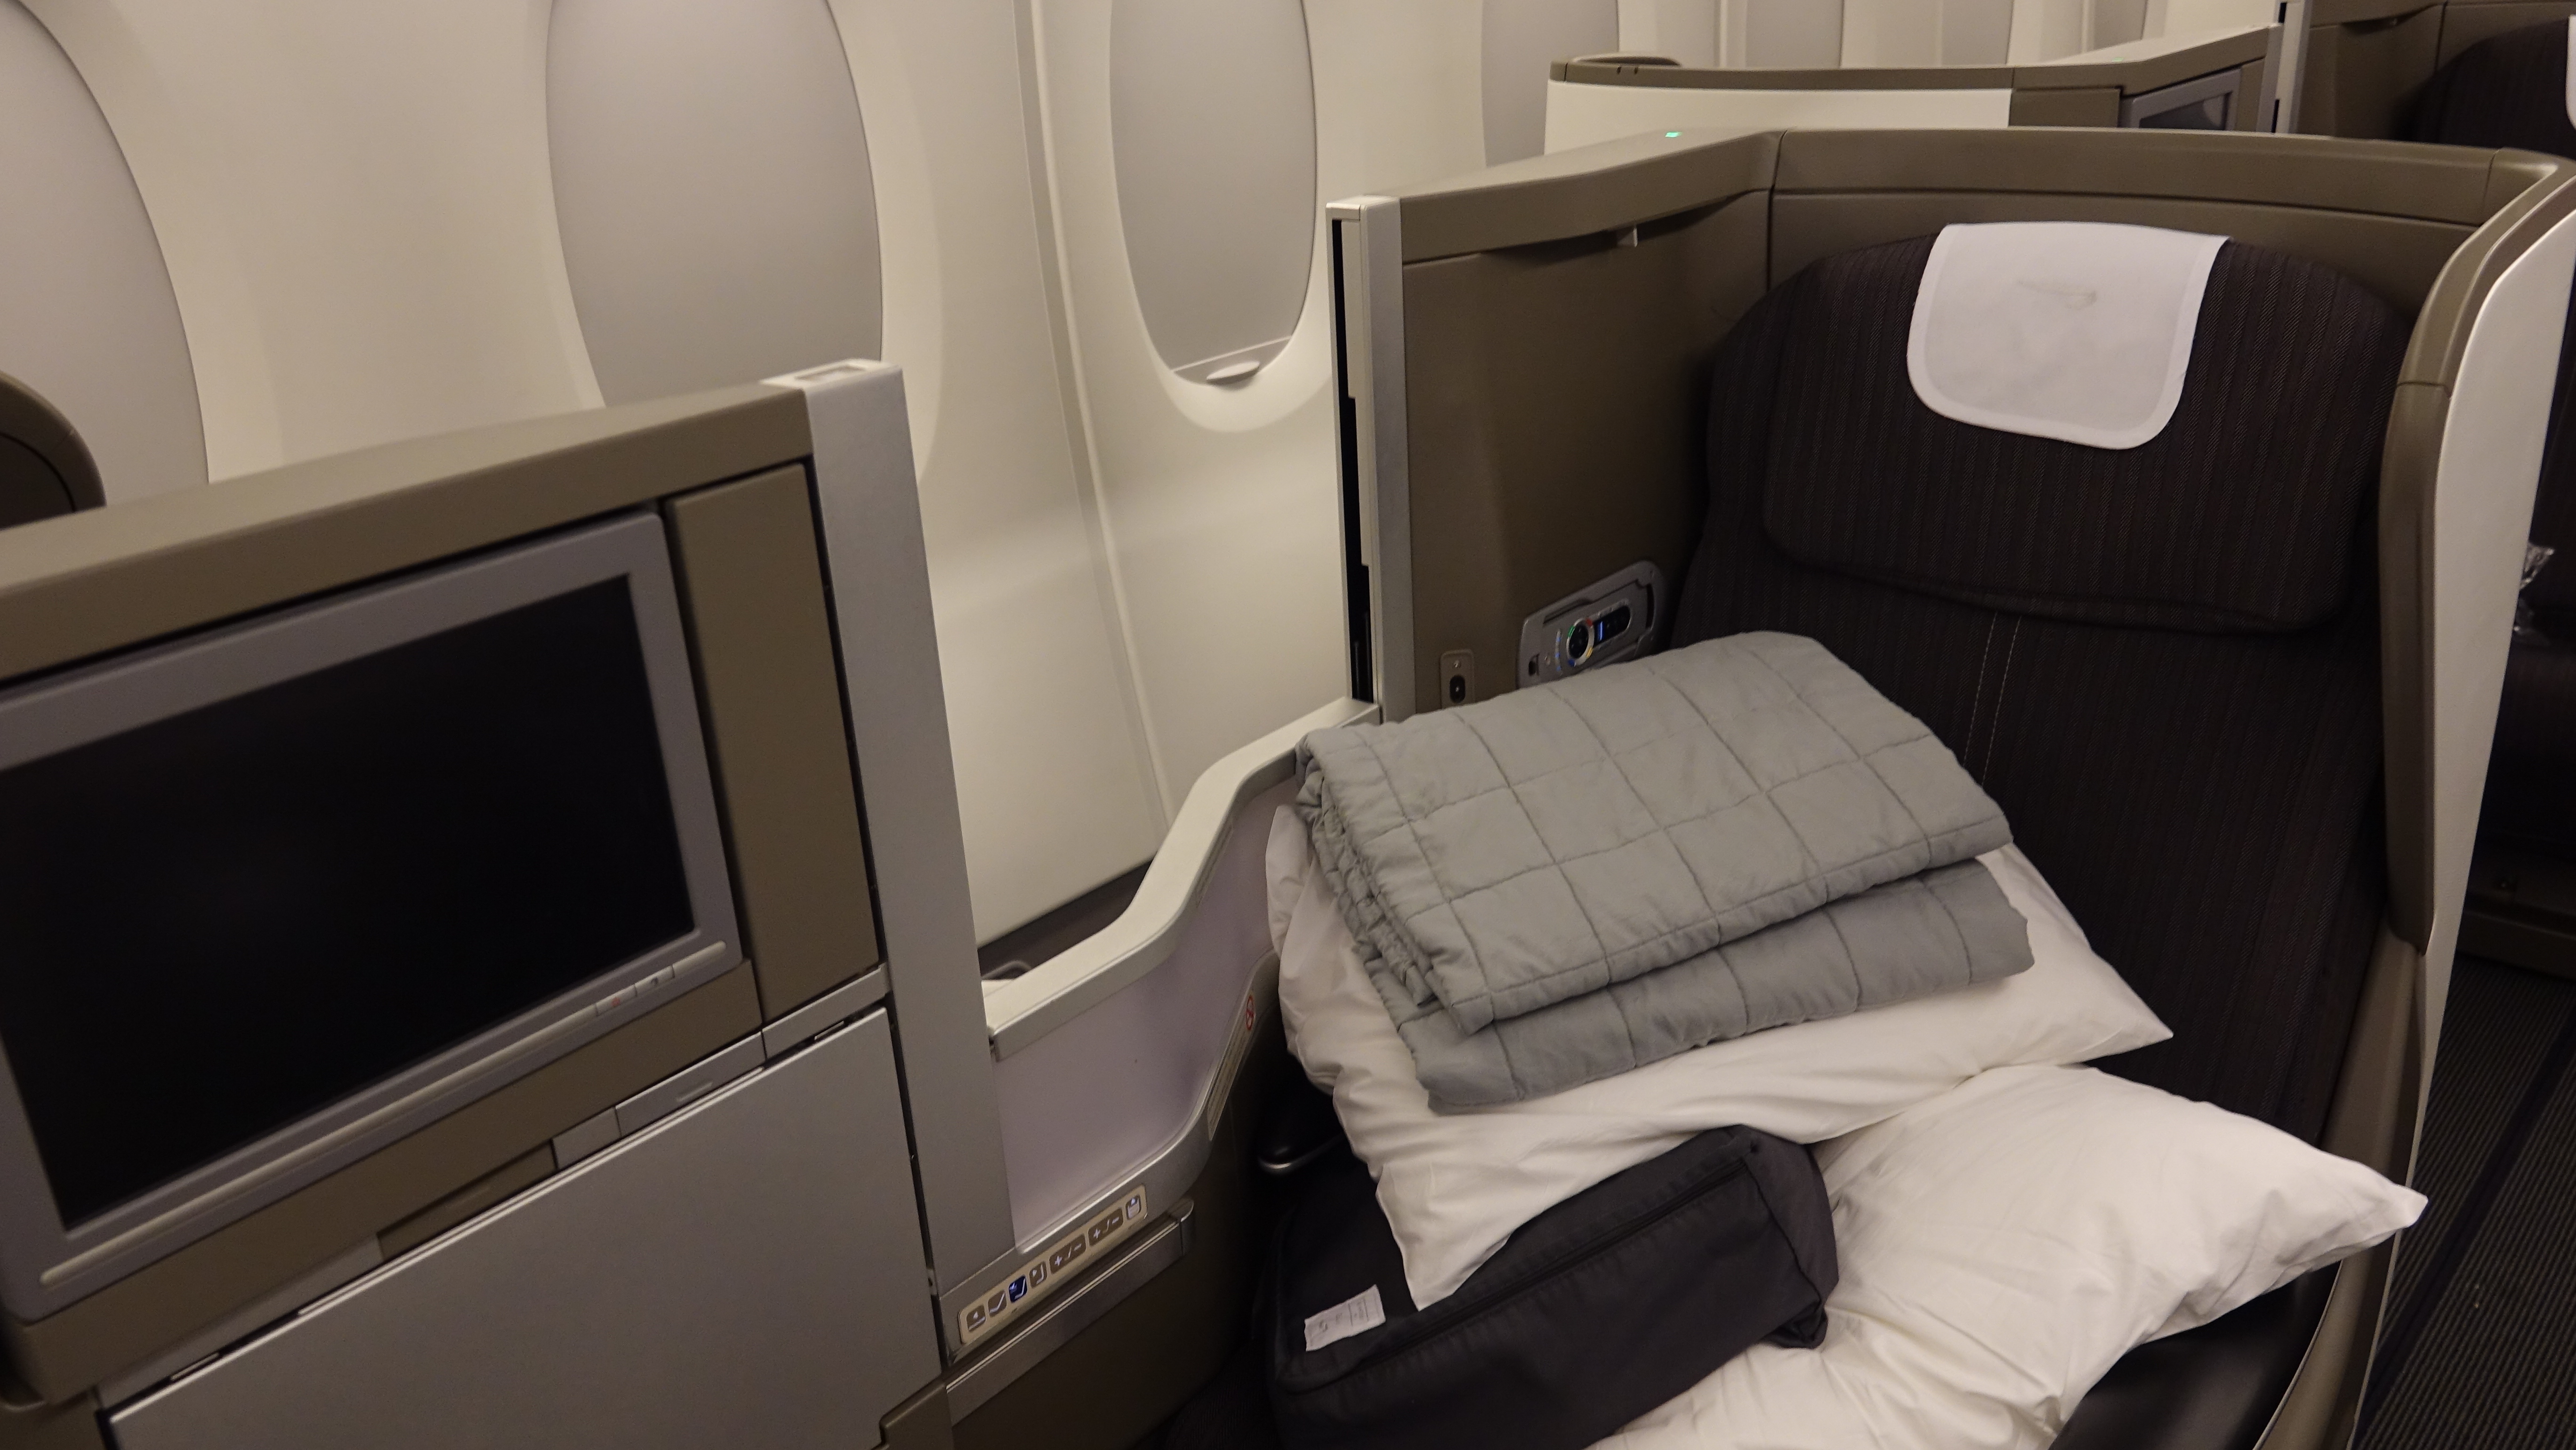 a bed with blankets and pillows in an airplane